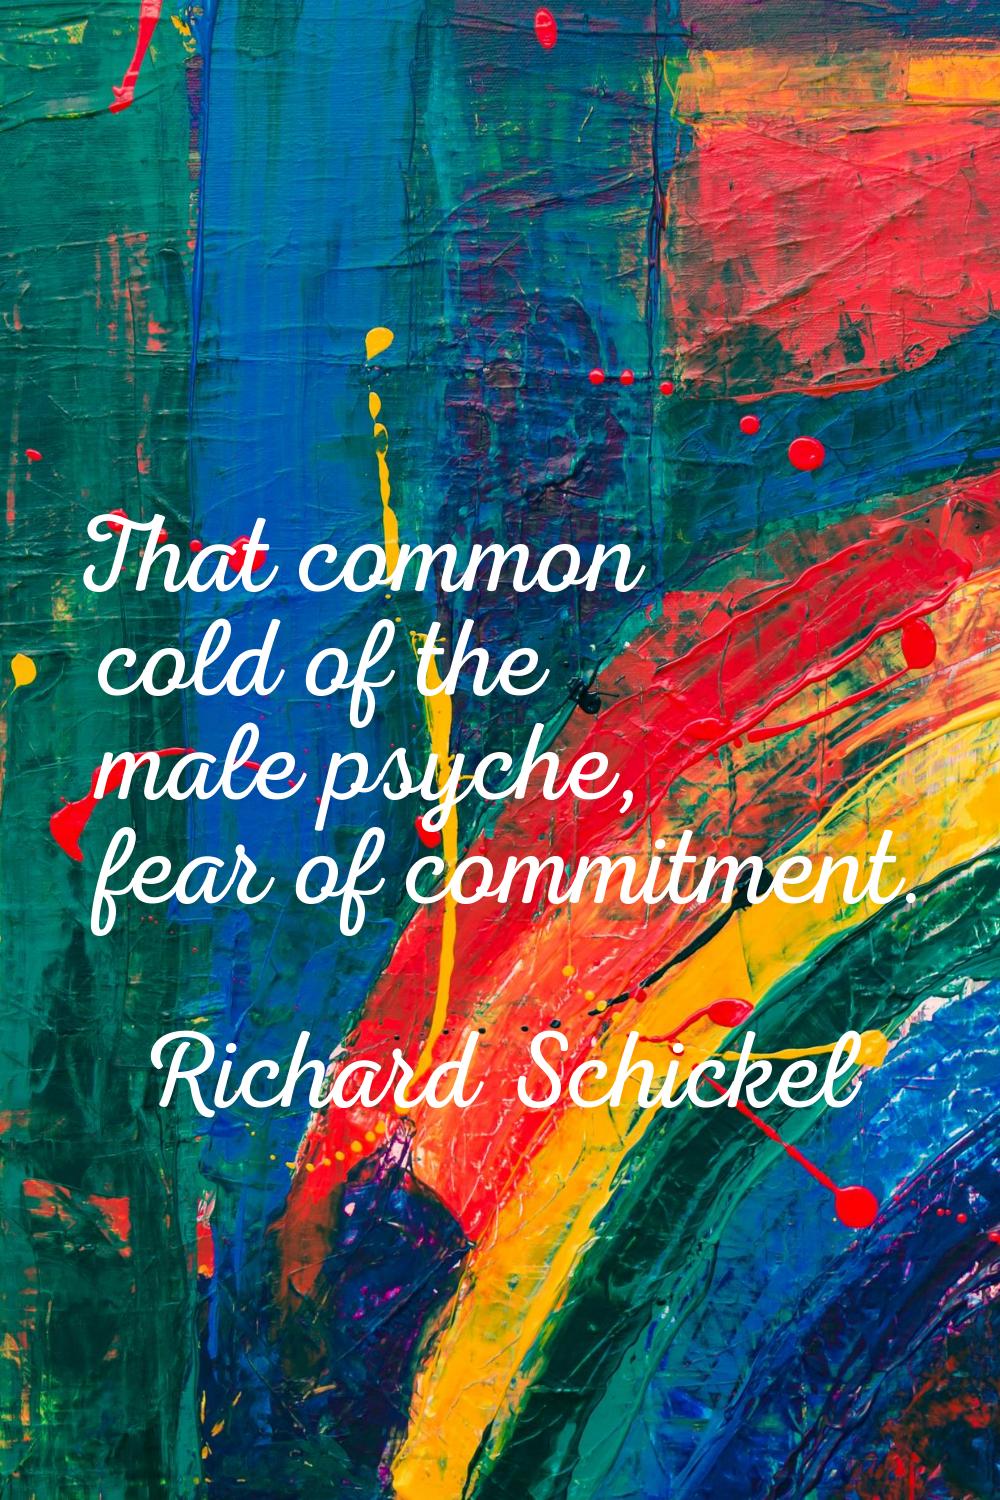 That common cold of the male psyche, fear of commitment.